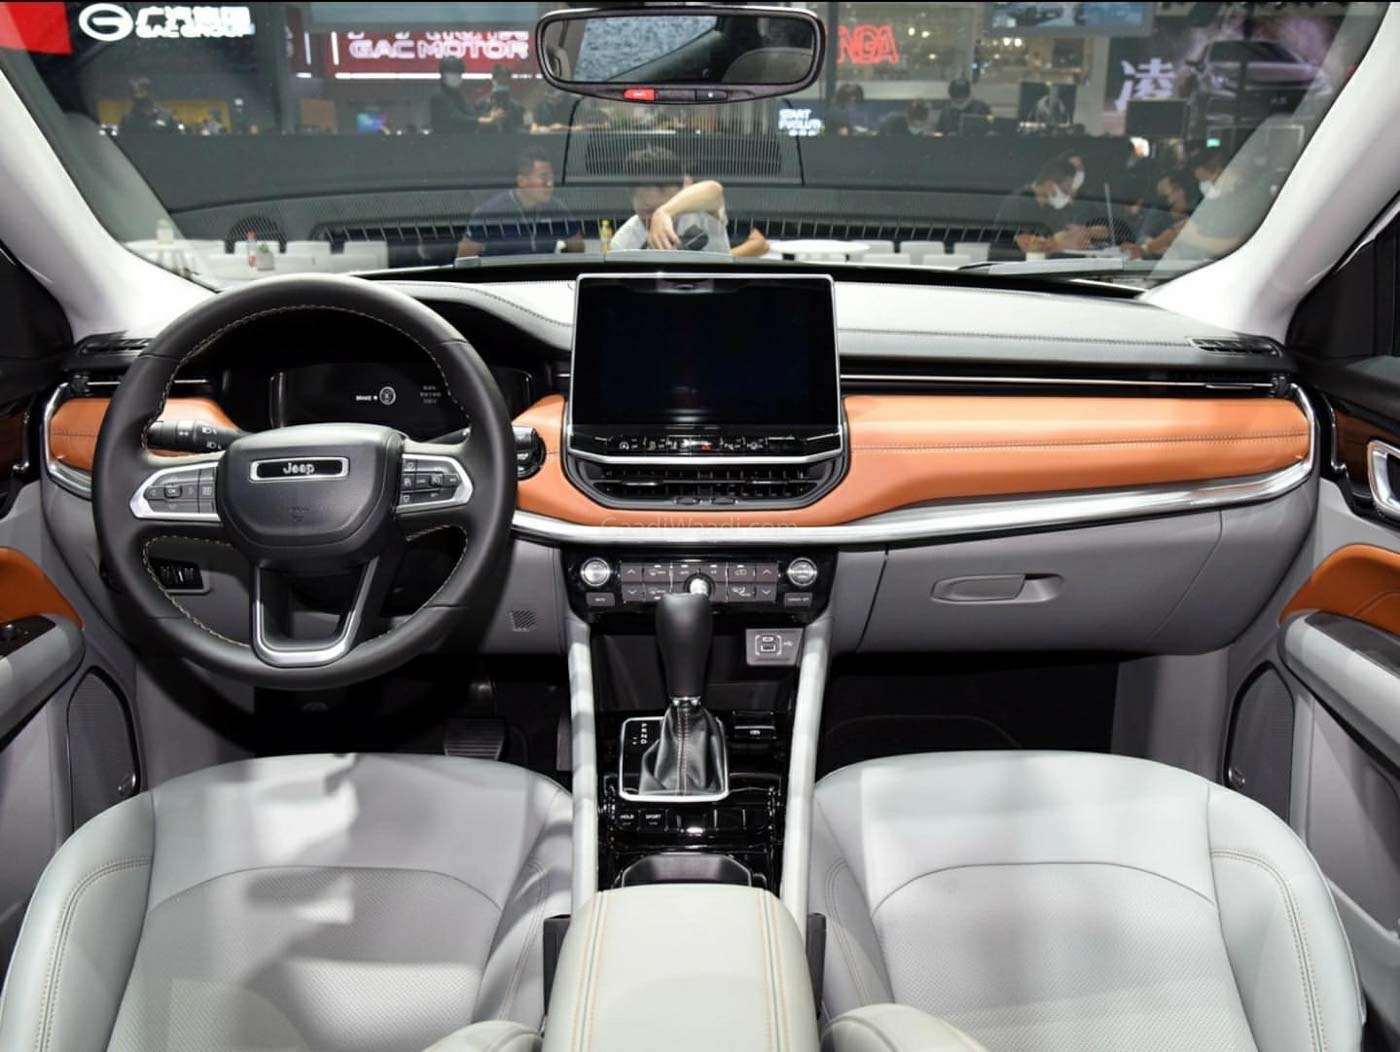 2021 Jeep Compass Interior Detailed In Real World Images